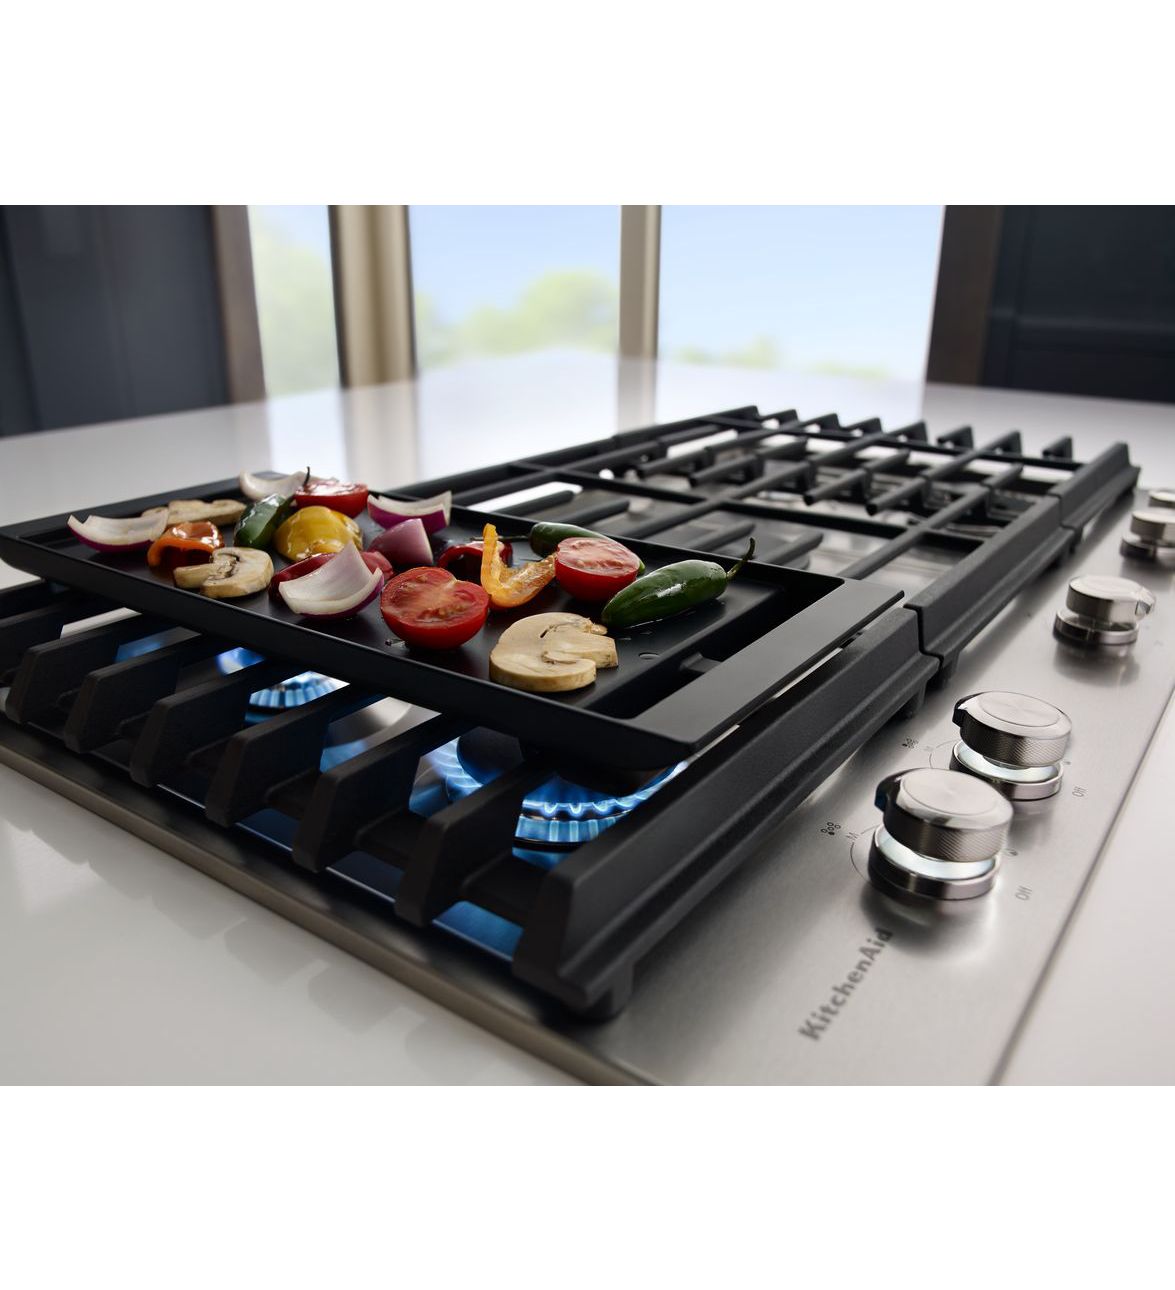 5 Burner Gas Cooktop With Griddle, Countertop Gas Stove With Griddle